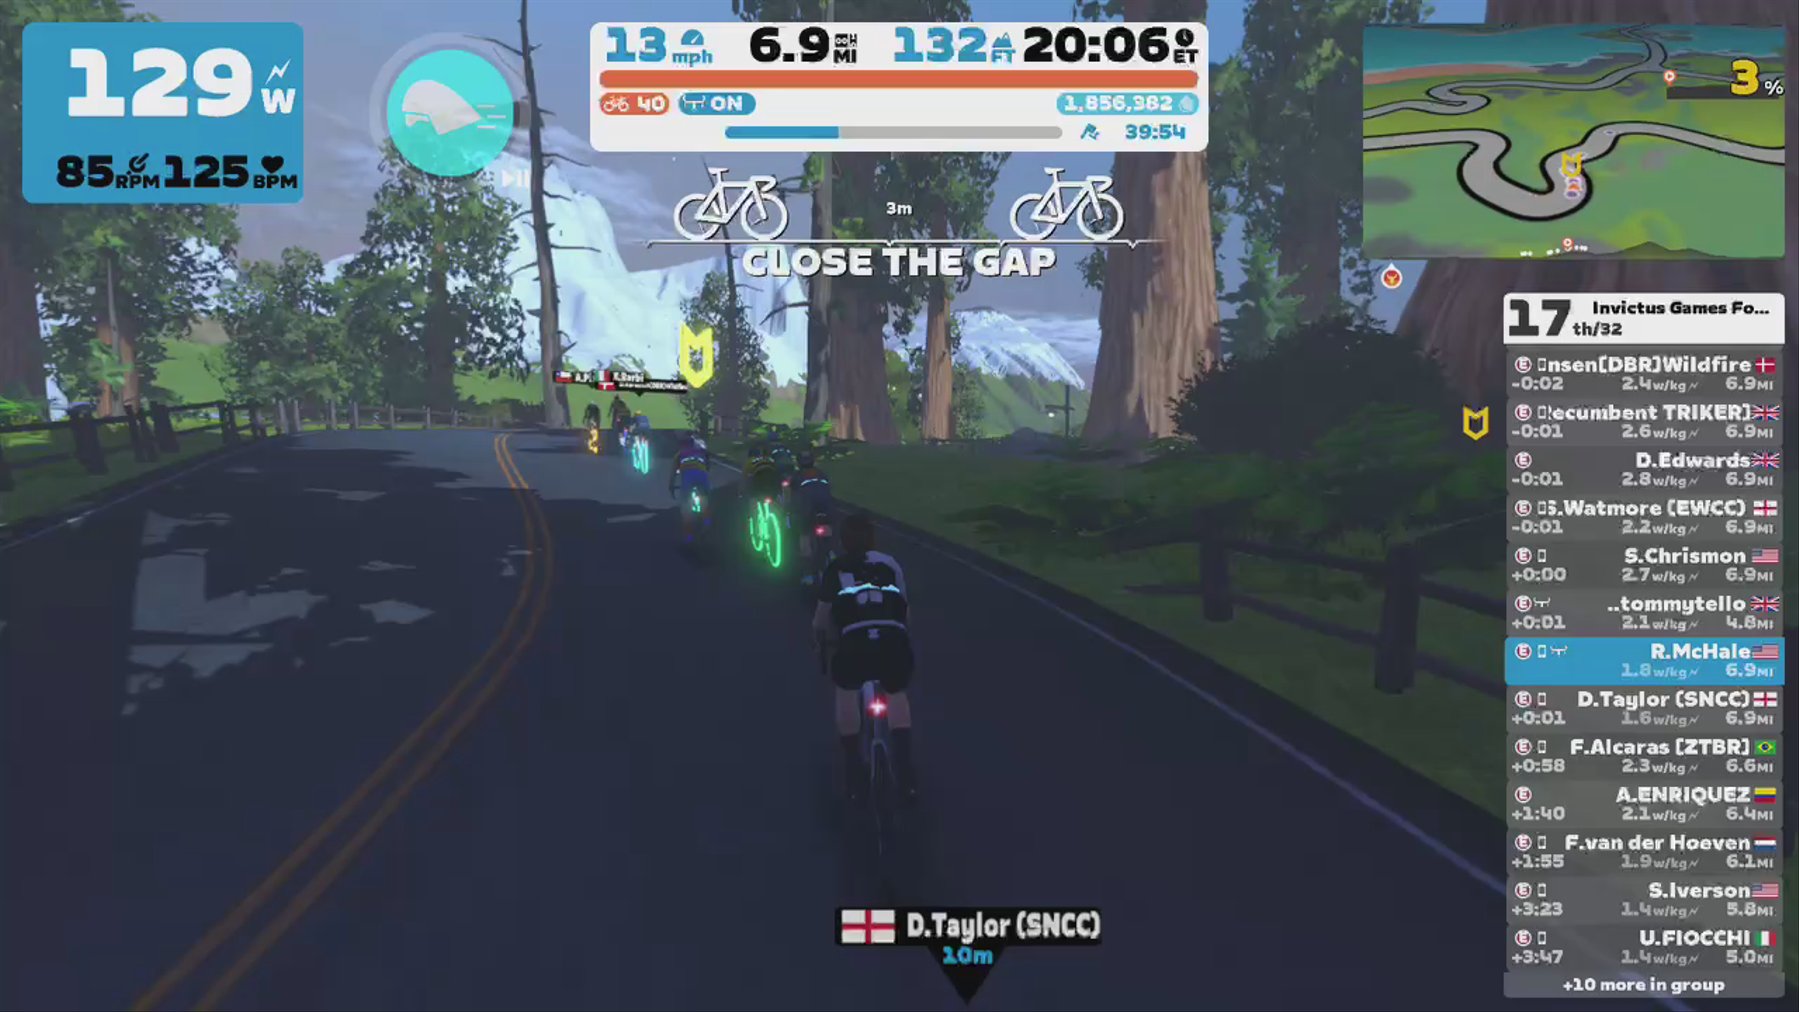 Zwift - Group Ride: Invictus Games Foundation Social Ride (E) on Sand And Sequoias in Watopia